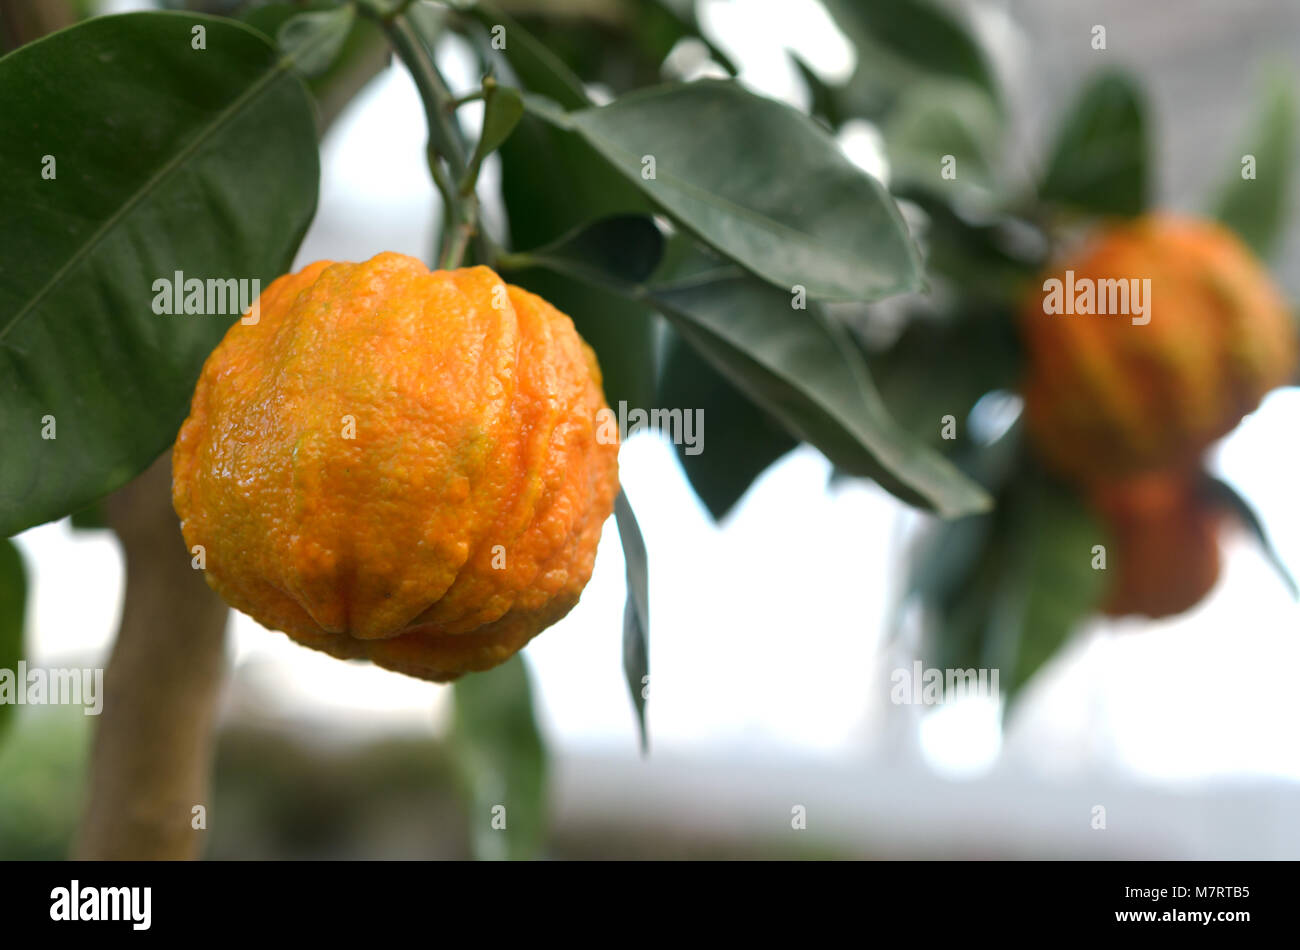 Citrus mandarin with thick skin on a green branch Stock Photo